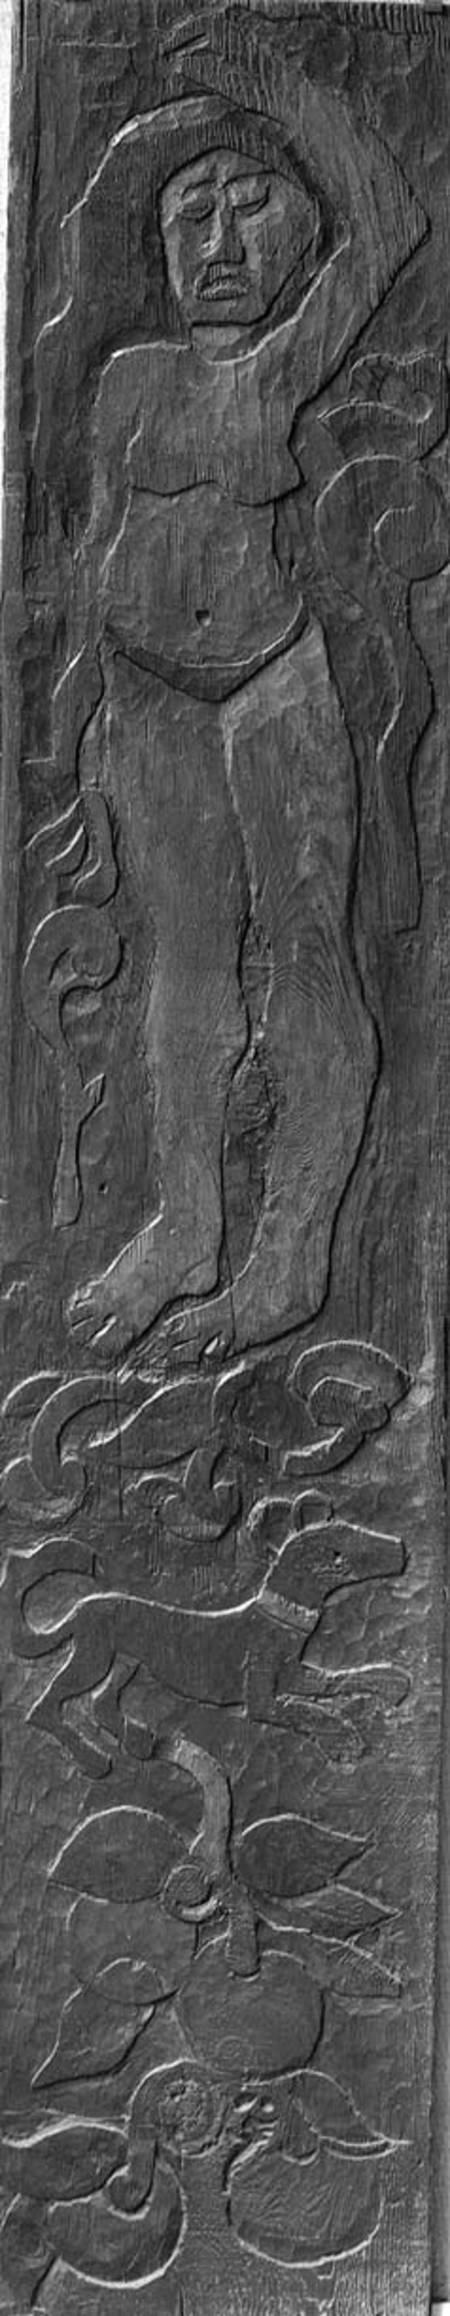 Carved vertical panel from the door frame of Gauguin's final residence in Atuona on Hiva Oa (Marques von Paul Gauguin